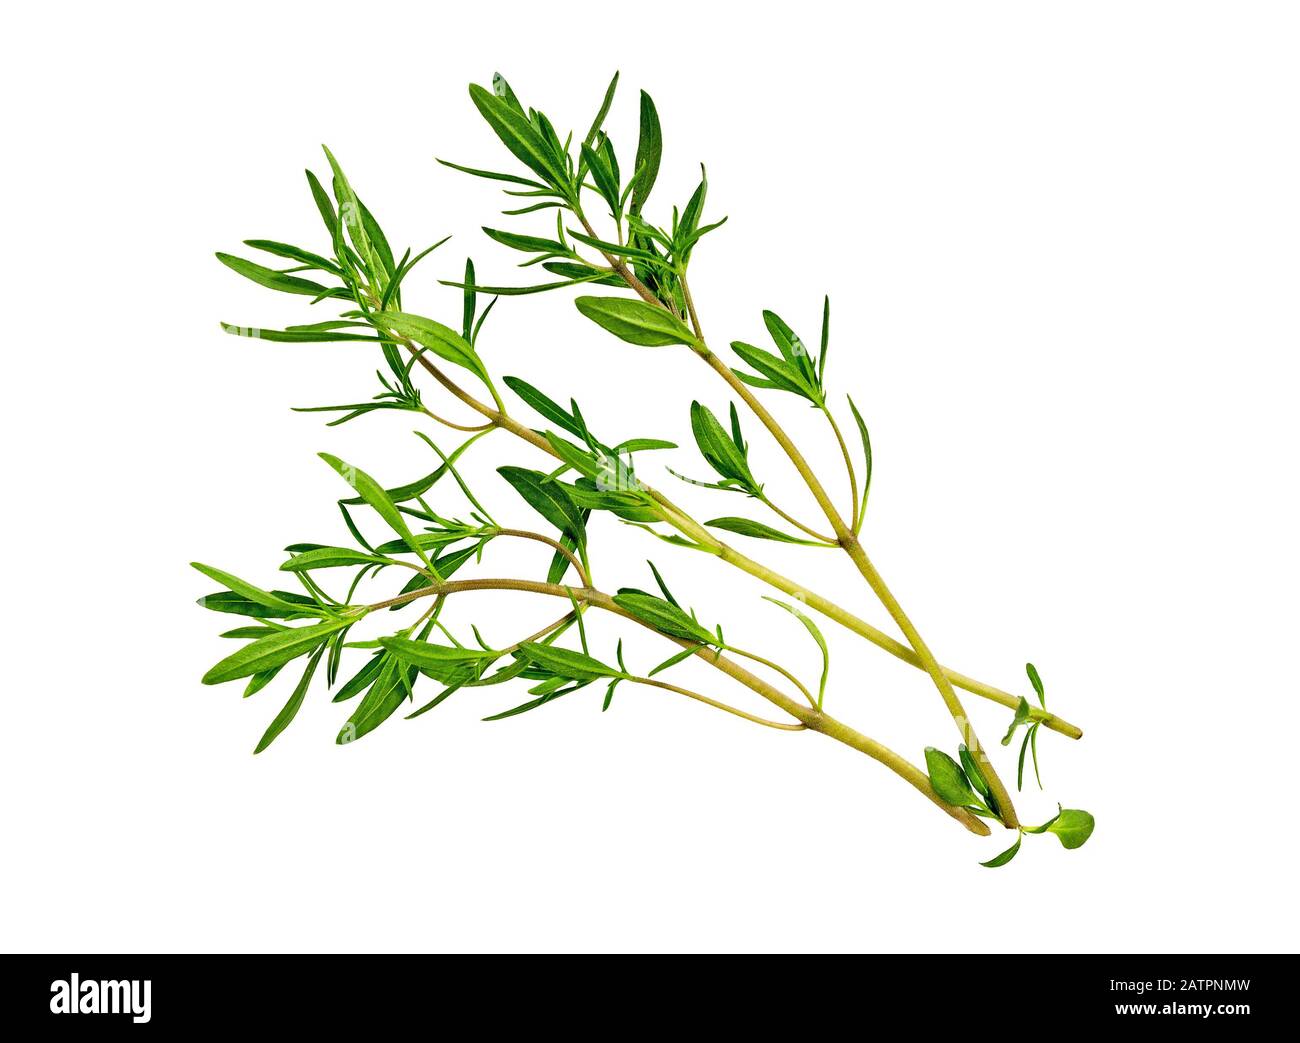 Savory bunch isolated on white background. Savory herb leaves. Fresh green savory plant. Stock Photo